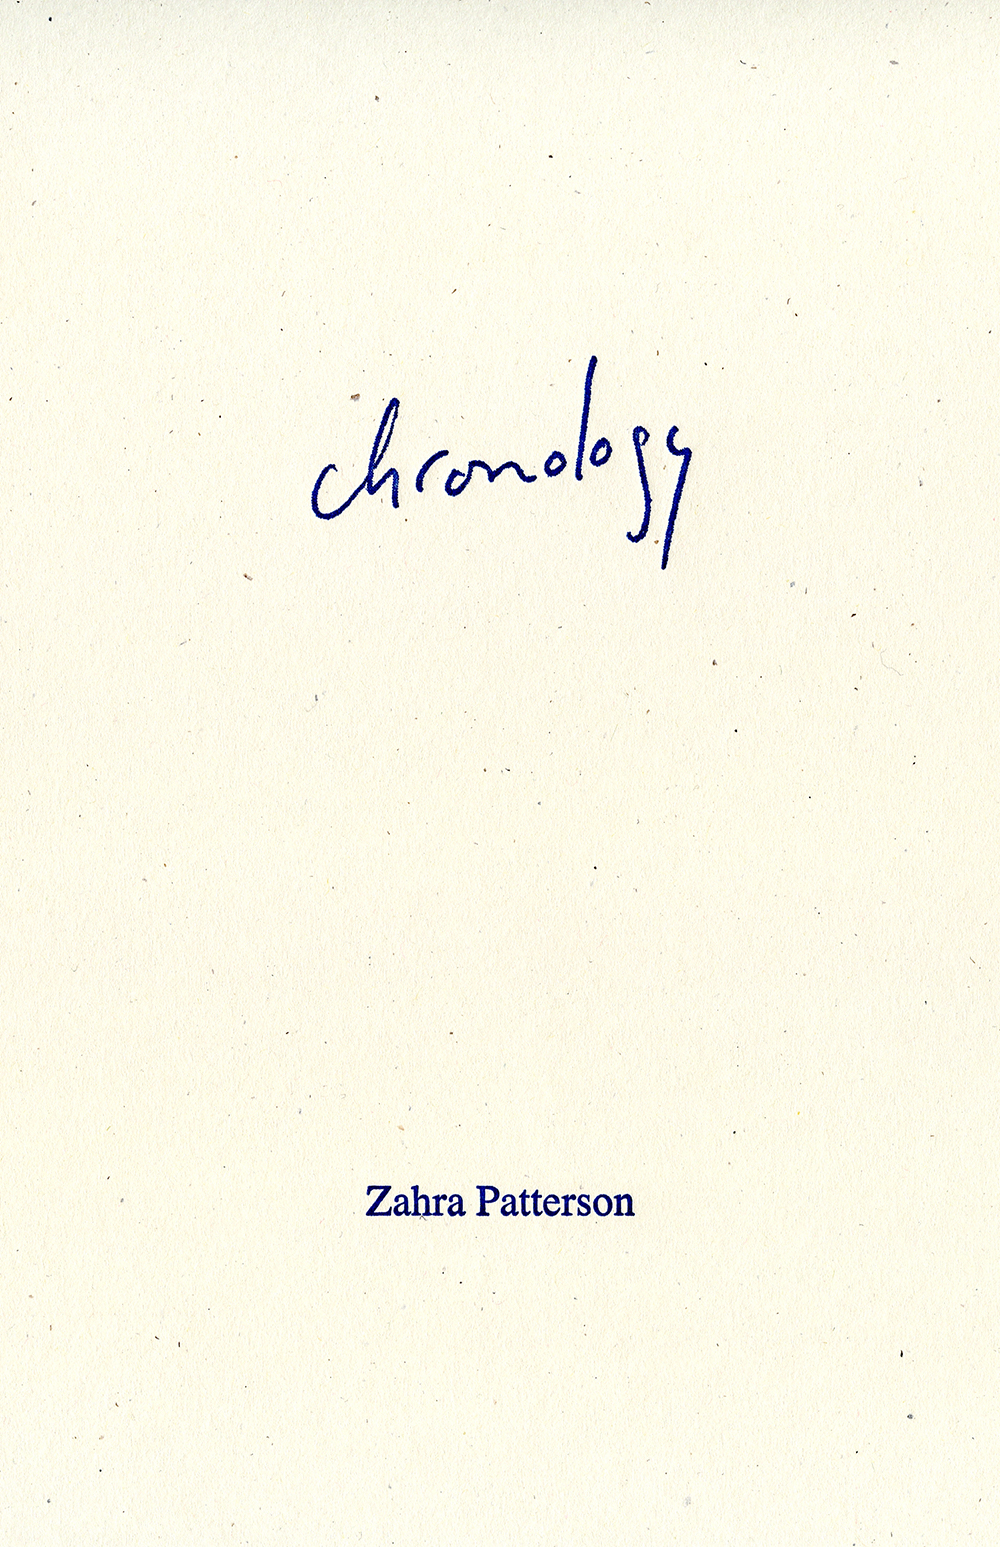 zahra patterson - chronology book cover